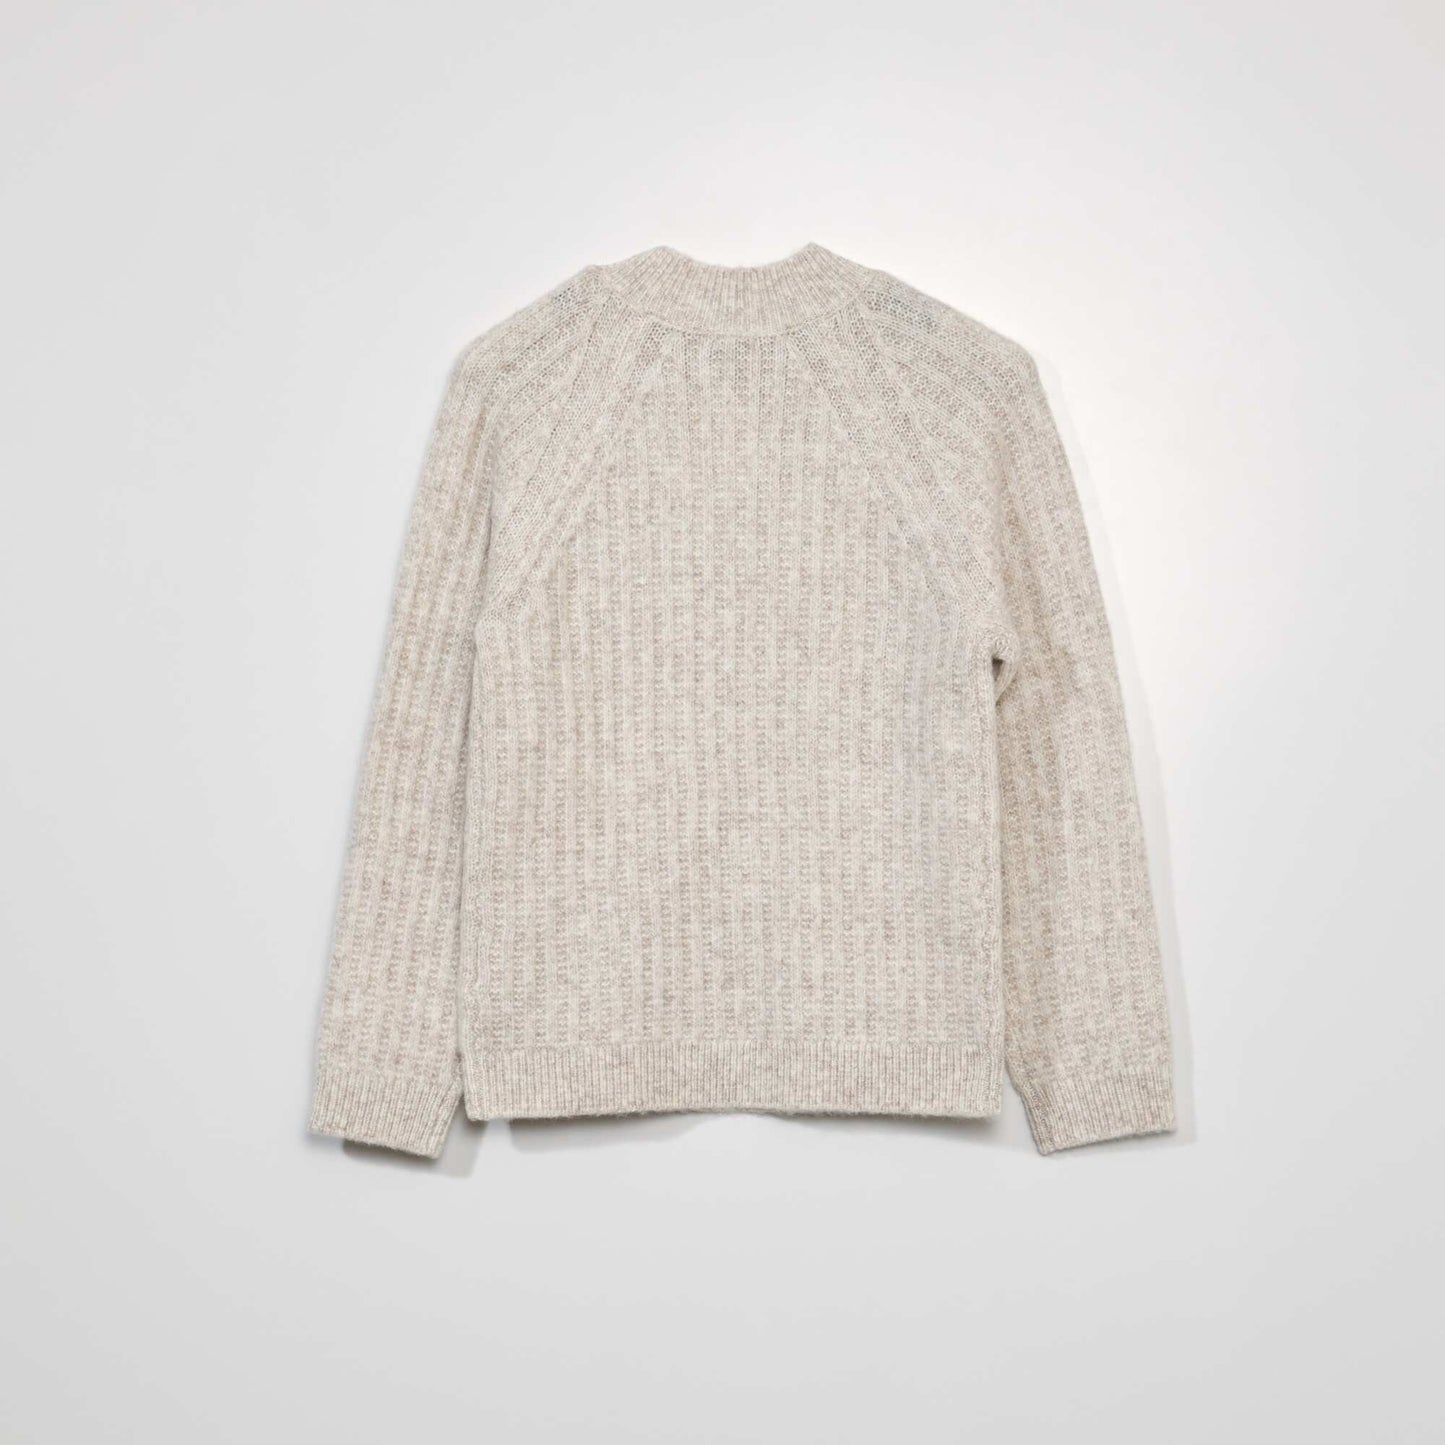 Knit sweater with high neck MIX_BEIG